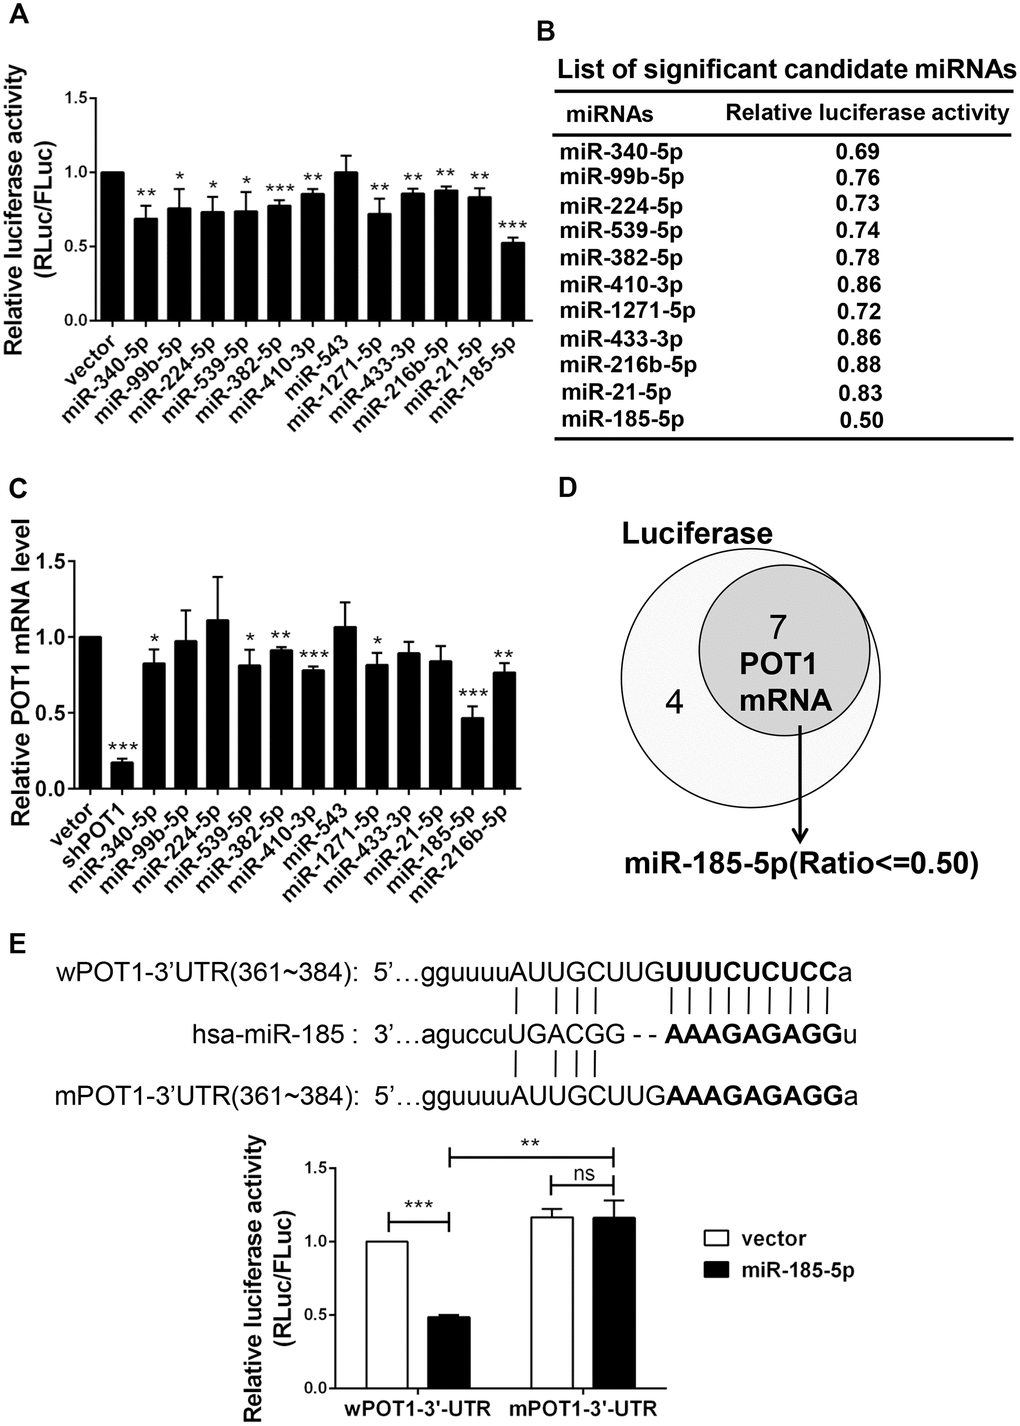 Identification of miR-185 targeting the 3’-UTR of shelterin POT1. (A) Transient dual luciferase reporter assay of HEK293T cells following expressing each candidate miRNA and the POT1 3’-UTR. P values were determined by Student’s t-test. *PB) List of significant candidate miRNAs and the relative luciferase activities of cells from (A). (C) Relative POT1 mRNA level after overexpression of each candidate miRNA in HTC75 cells. P values were determined by Student’s t-test. **PD) Venn diagram of significant candidate miRNAs that downregulate either POT1 3’-UTR luciferase activity or endogenous POT1 mRNA levels. (E) The predicted seed region of the miR-185 target sites was mutated (in bold). The ability of miR-185 to target the seed regions of the wild-type (wPOT1) vs. mutant (mPOT1) 3’-UTR was determined by dual luciferase assay. P values were determined by Student’s t-test. **P